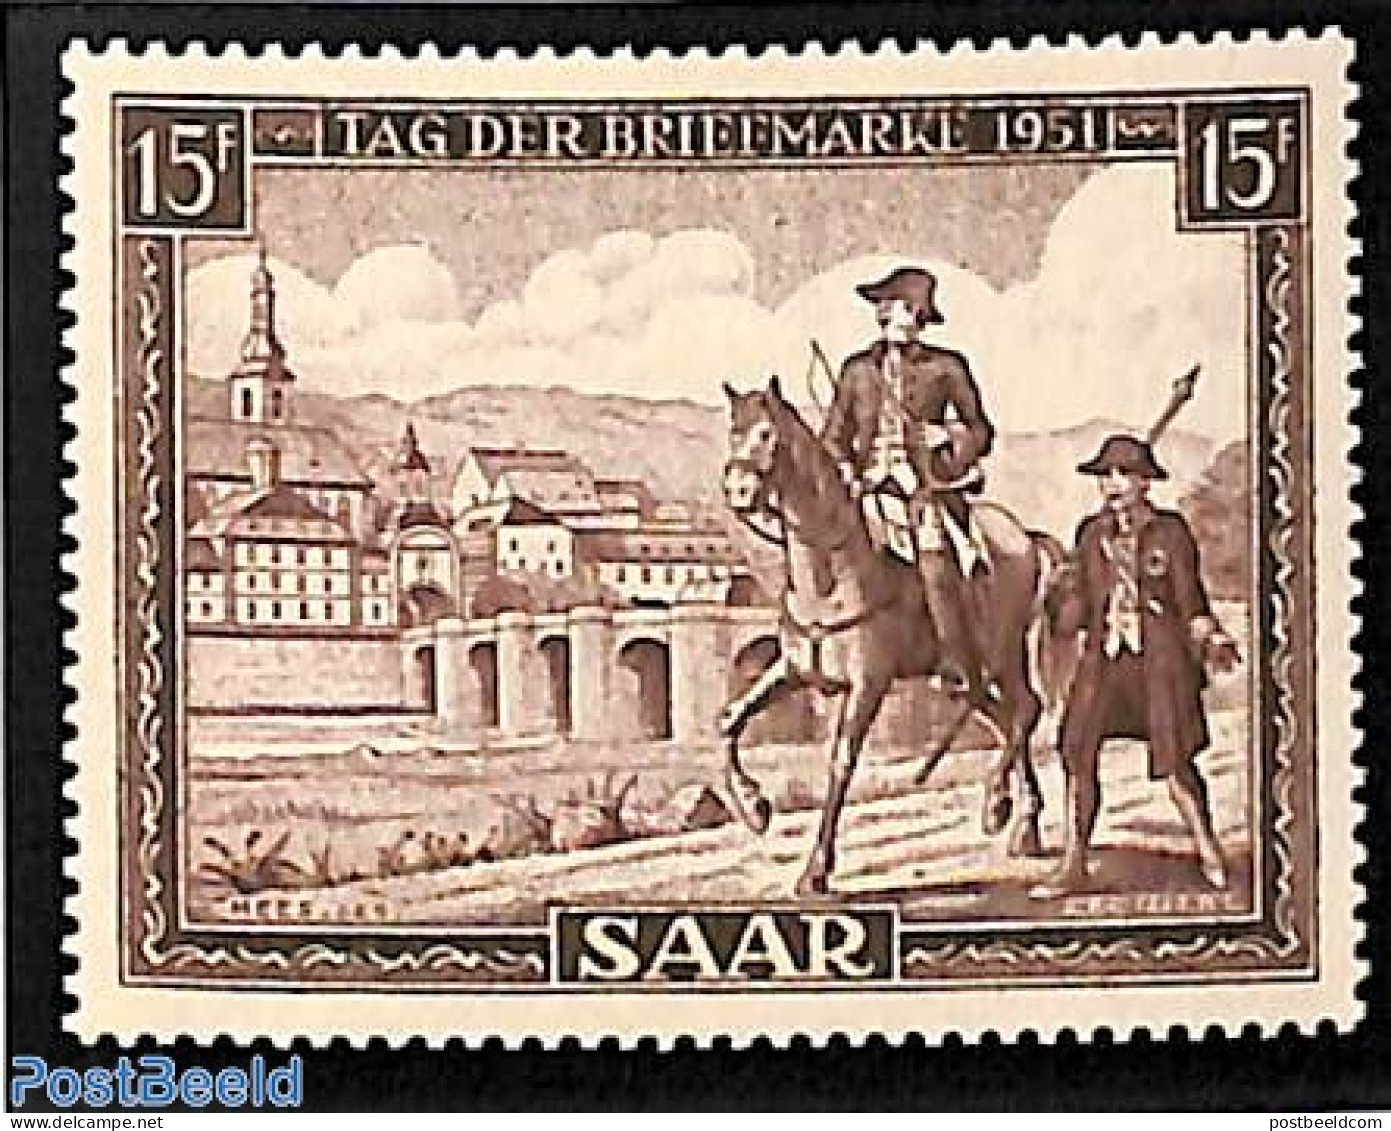 Germany, Saar 1951 Stamp Day 1v, Mint NH, Nature - Horses - Post - Stamp Day - Art - Bridges And Tunnels - Post